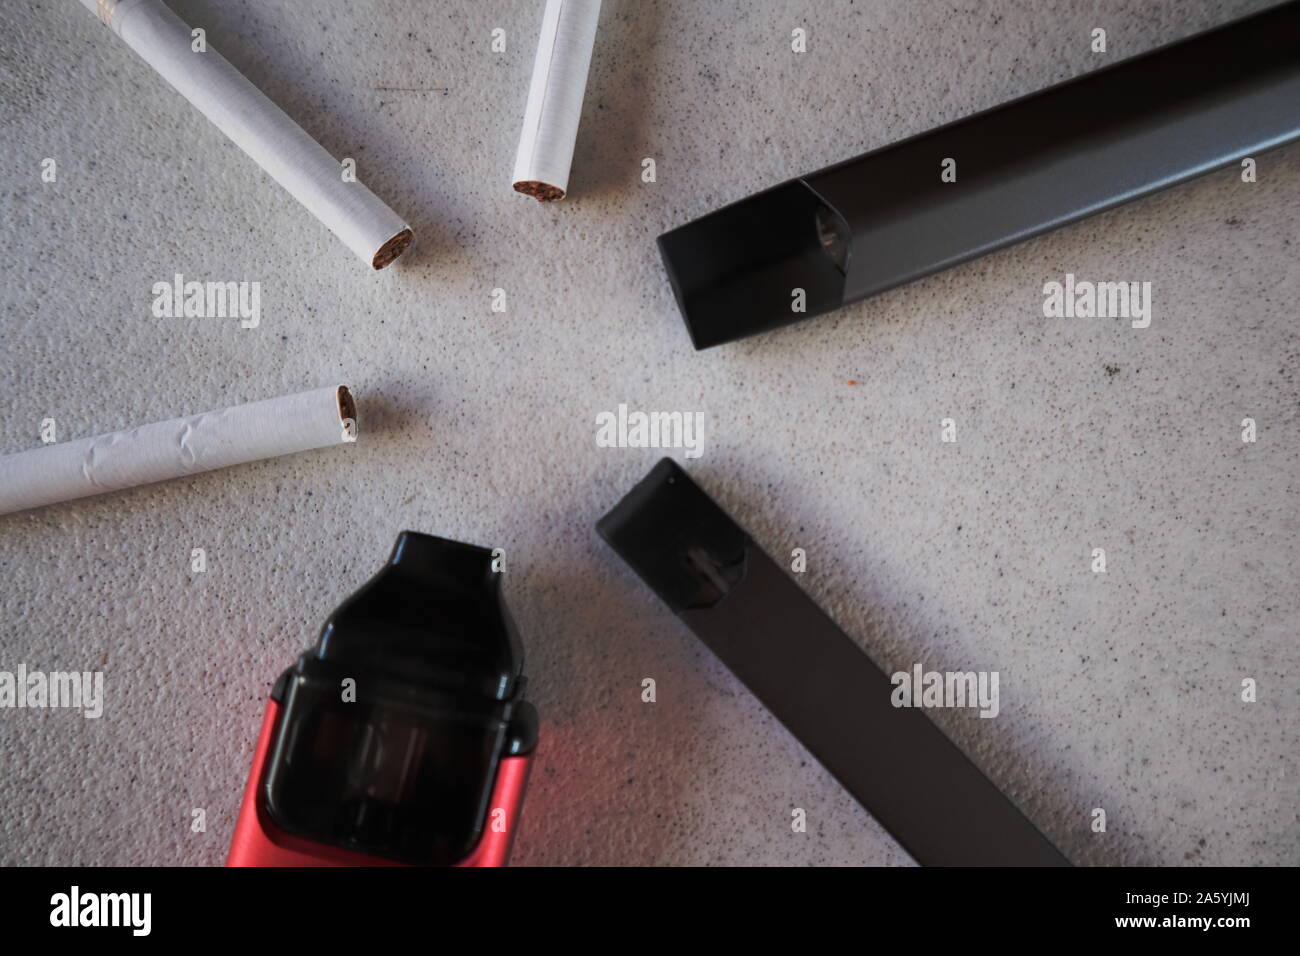 3 vape electronic cigarette devices and 3 cigarettes in a star pattern on a white textured background close up Stock Photo